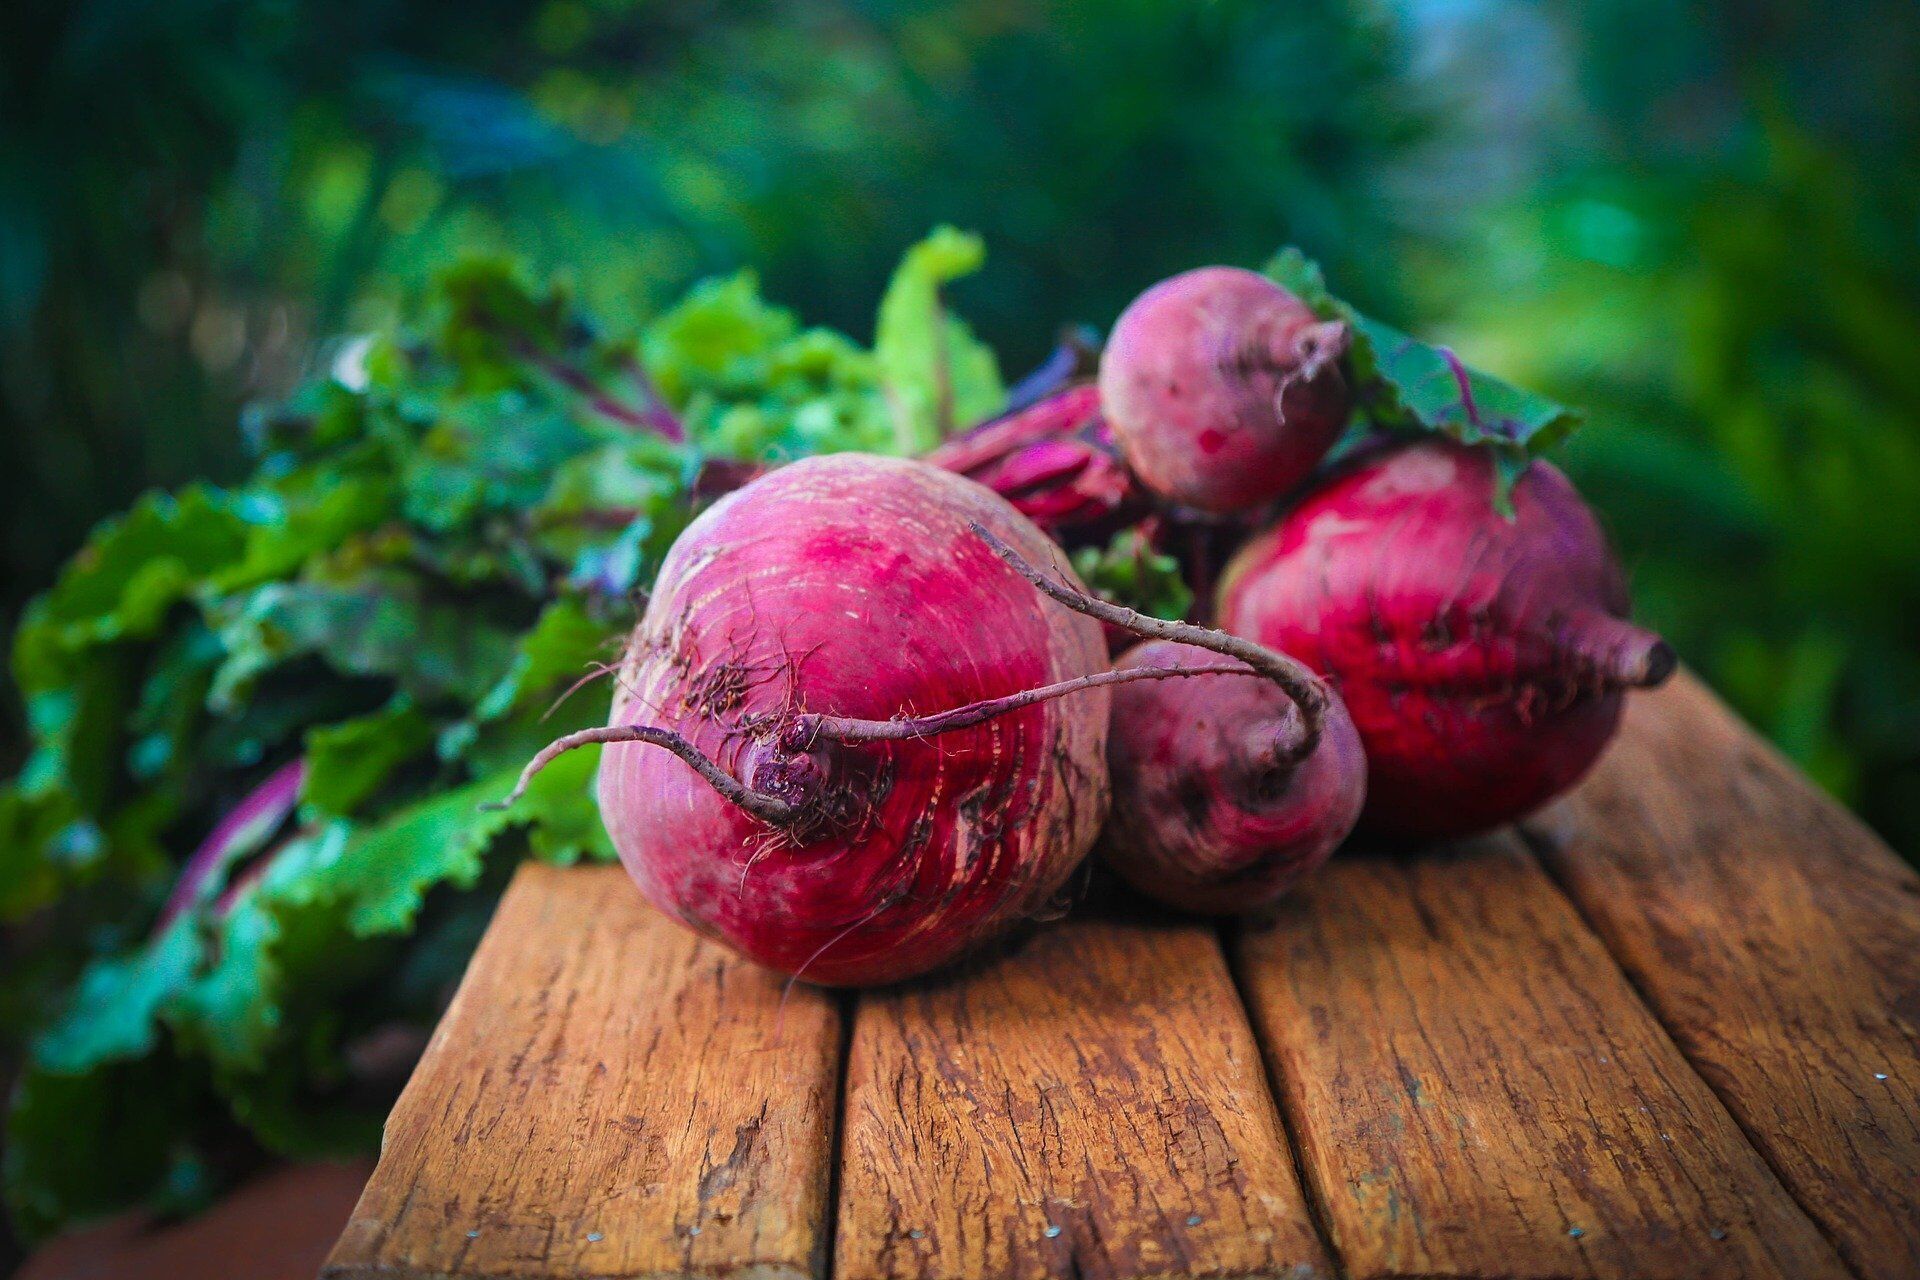 How to grate beets without getting your hands dirty: the most effective life hacks